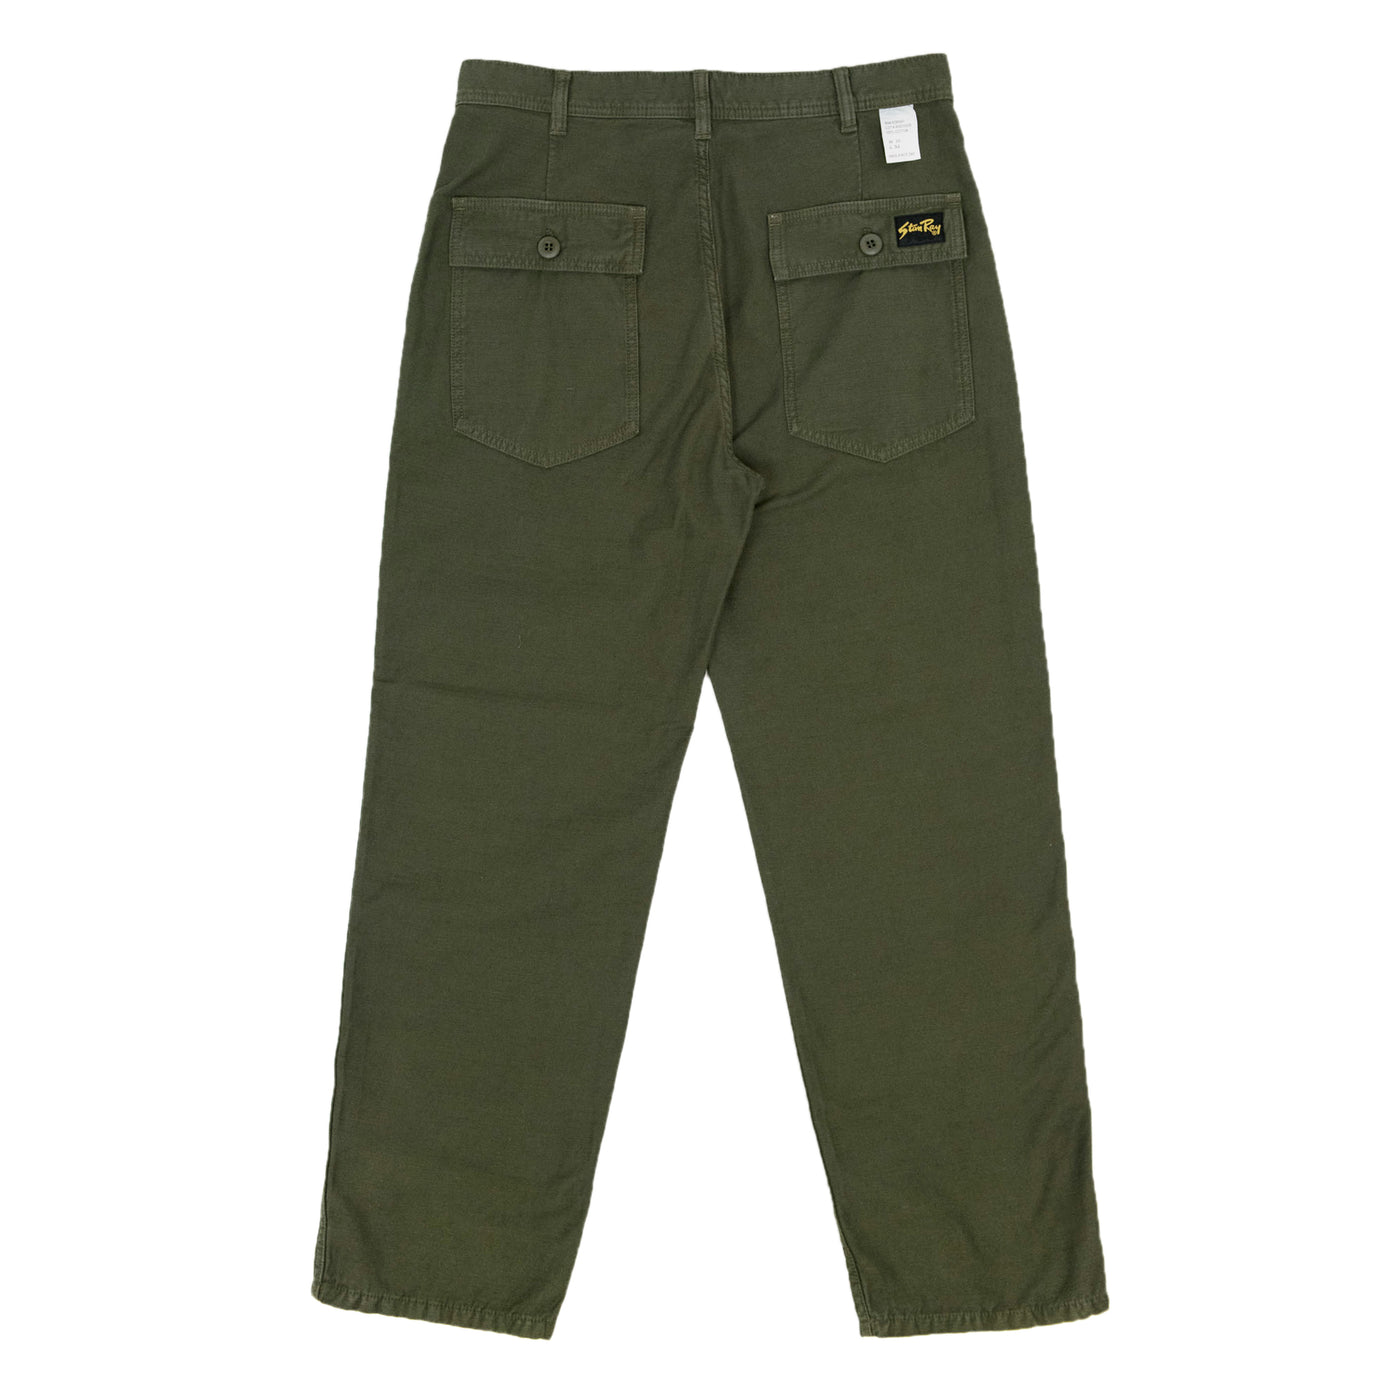 Stan Ray Cotton Sateen Olive Fatigue Fat Pant Trouser back